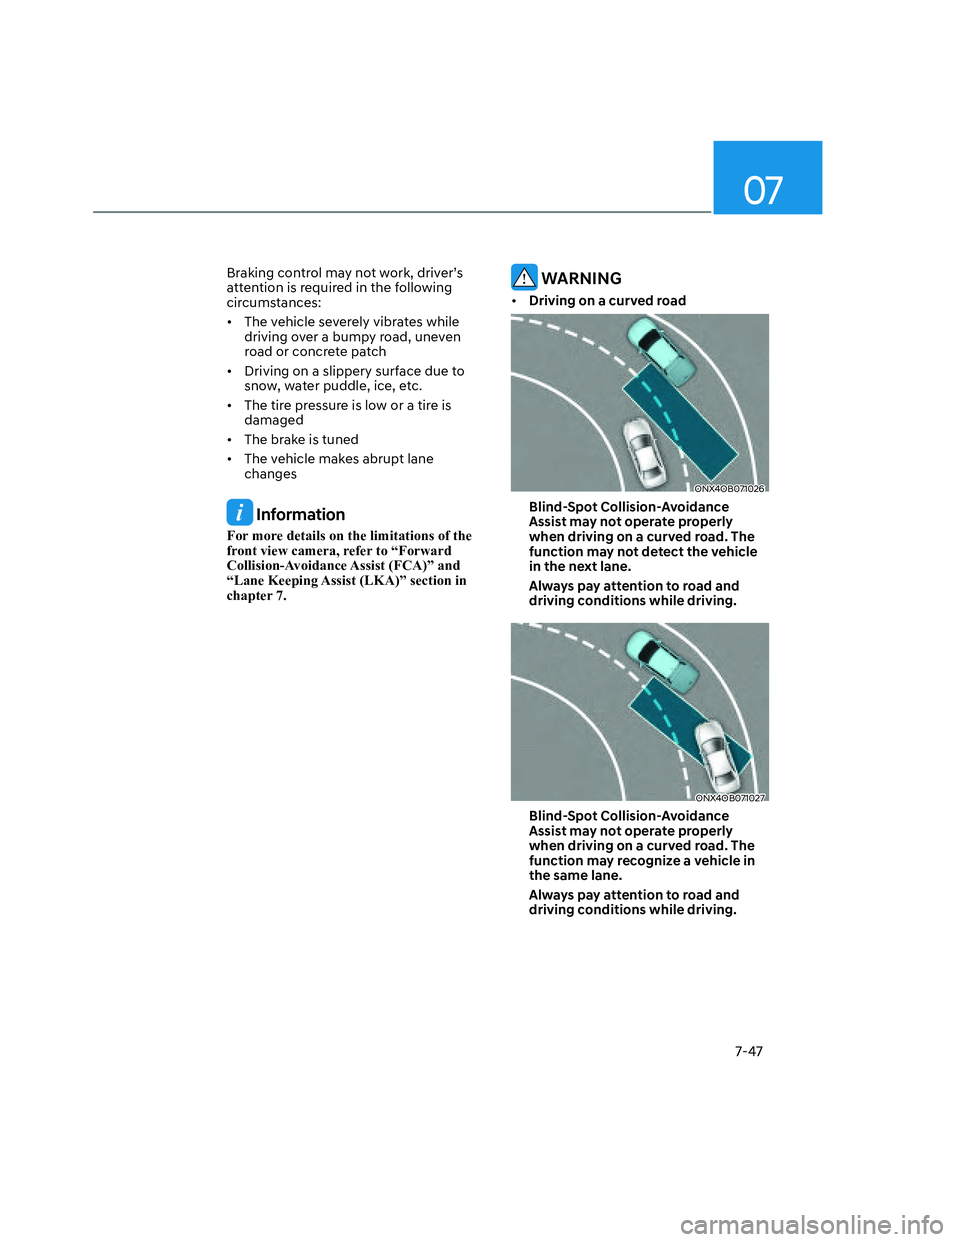 HYUNDAI SANTA CRUZ 2022 Owners Manual 07
7-47
Braking control may not work, driver’s 
attention is required in the following 
circumstances: 
•  The vehicle severely vibrates while 
driving over a bumpy road, uneven 
road or concrete 